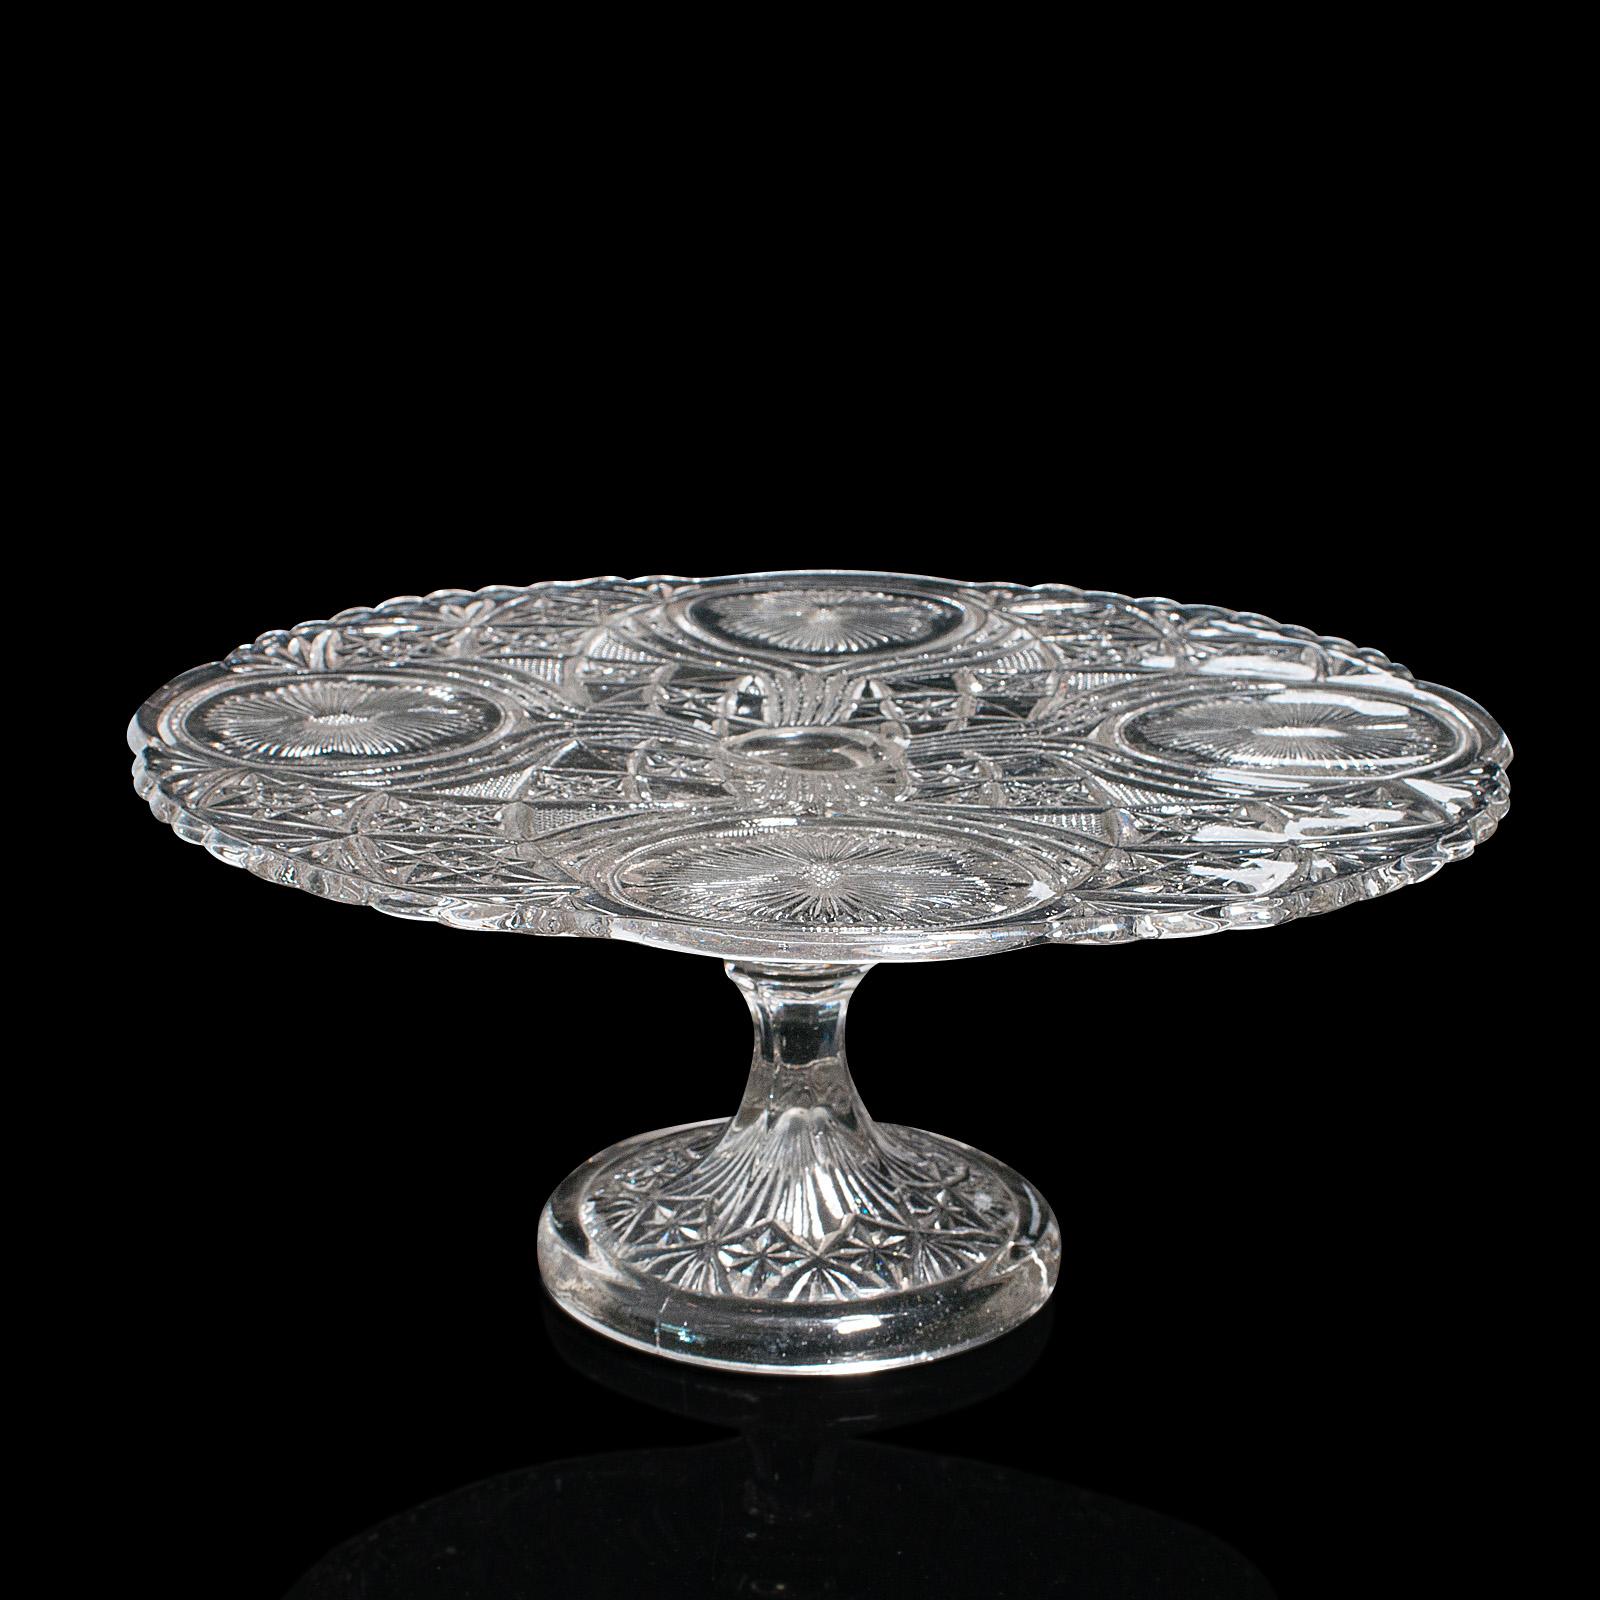 This is a vintage cake stand. A French, glass afternoon tea serving platter, dating to the mid 20th century, circa 1950.

Enthusiastically decorated glass presents a quality appeal
Displaying a desirable aged patina and in good order
Cut glass